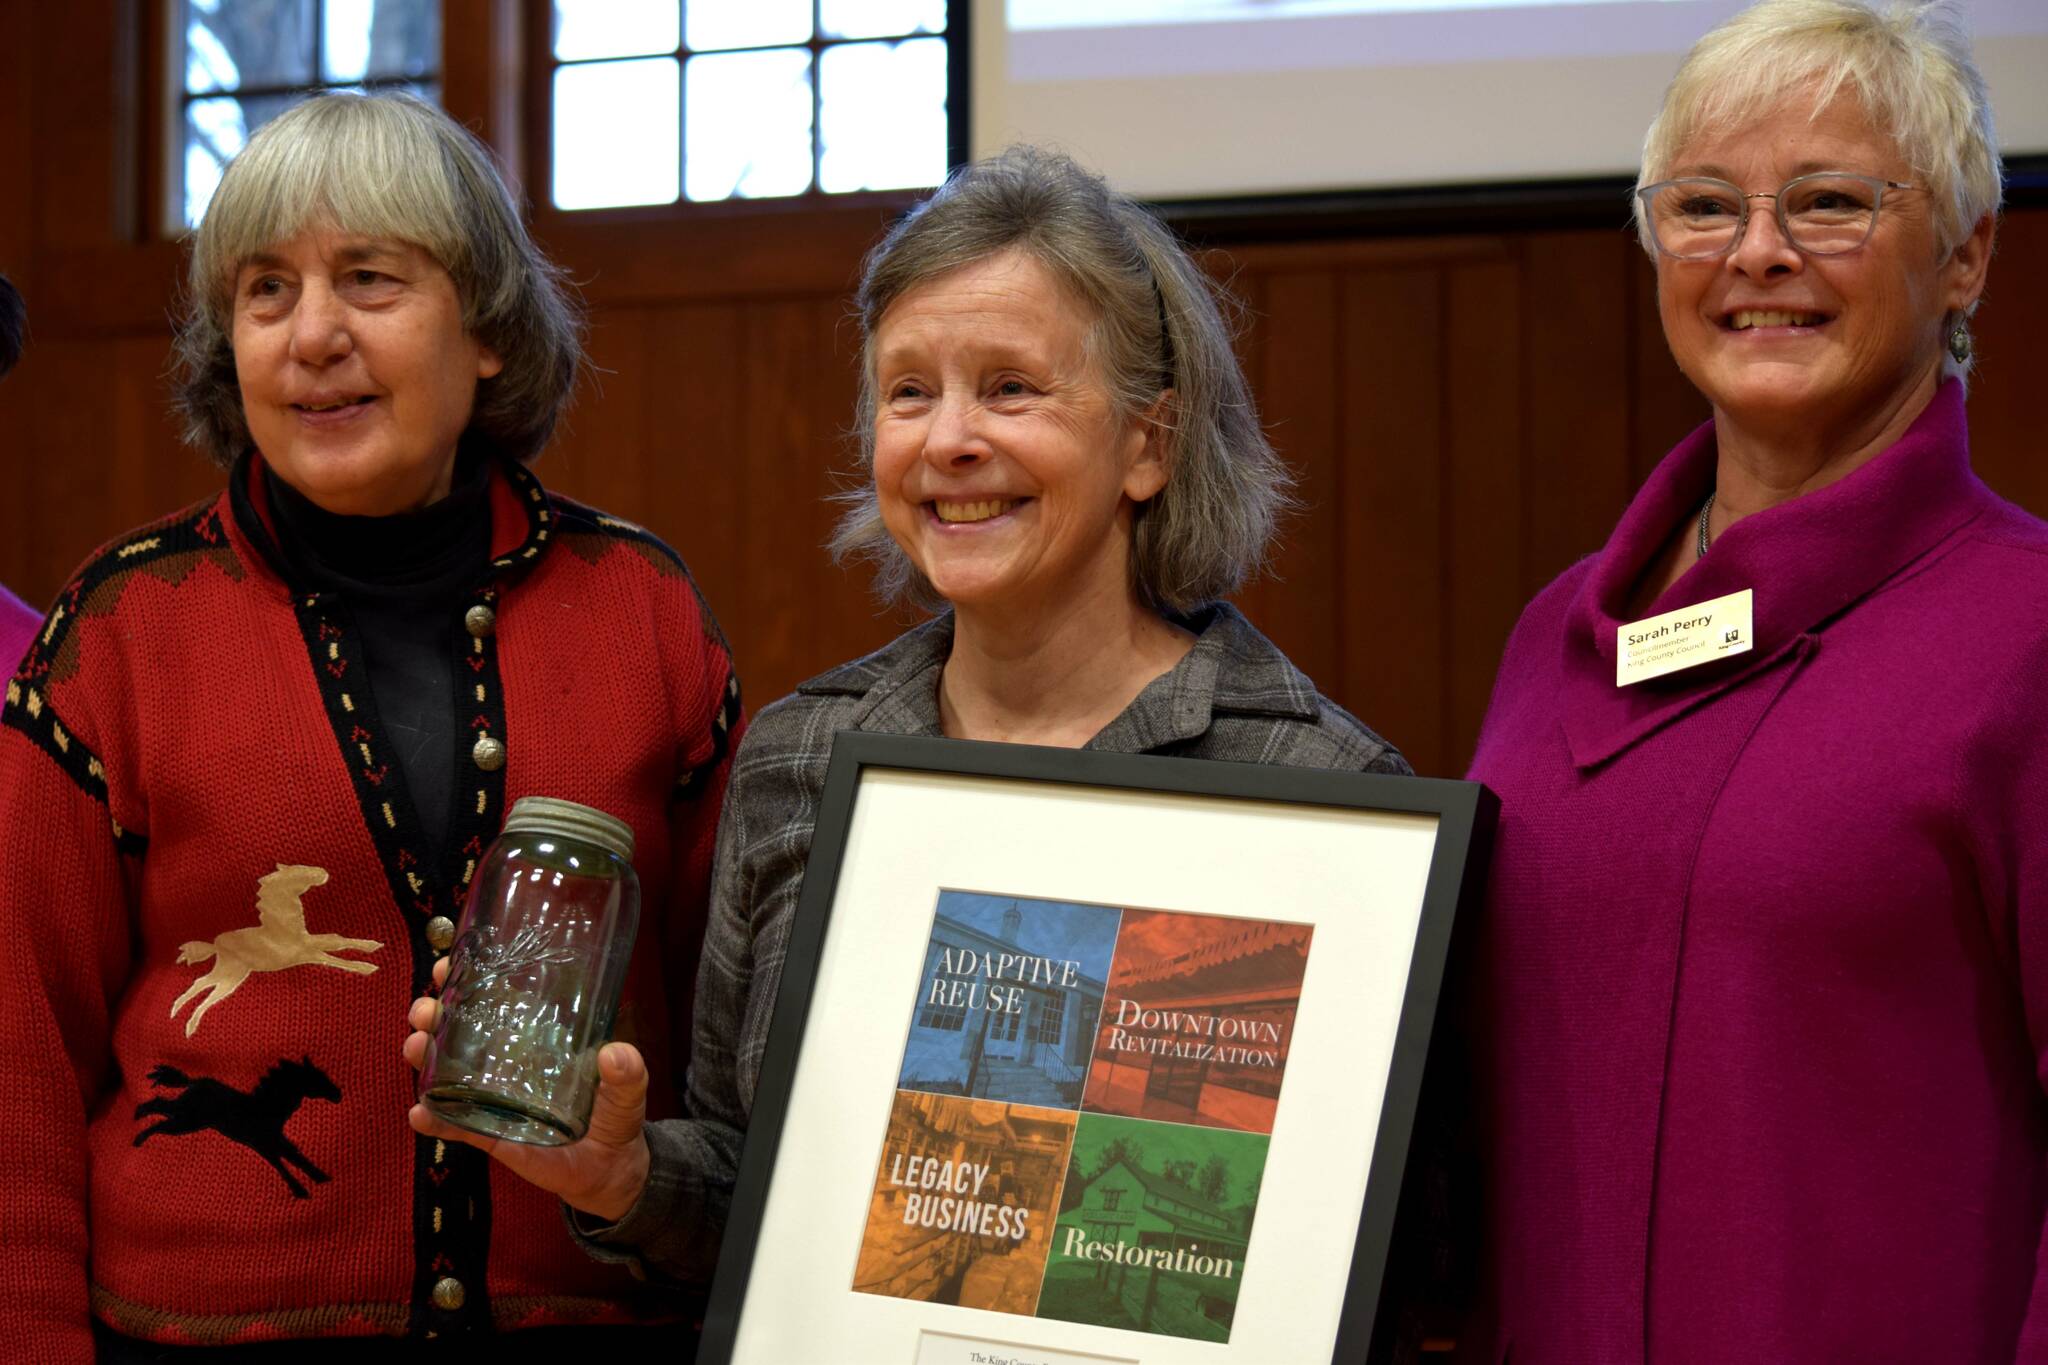 Carmichael’s Store owner Wendy Thomas, center, poses with King County Councilmember Sarah Perry, right, and Mary Norton at the John D. Spellman Awards ceremony in North Bend on Dec. 7. Photos Conor Wilson/Valley Record.